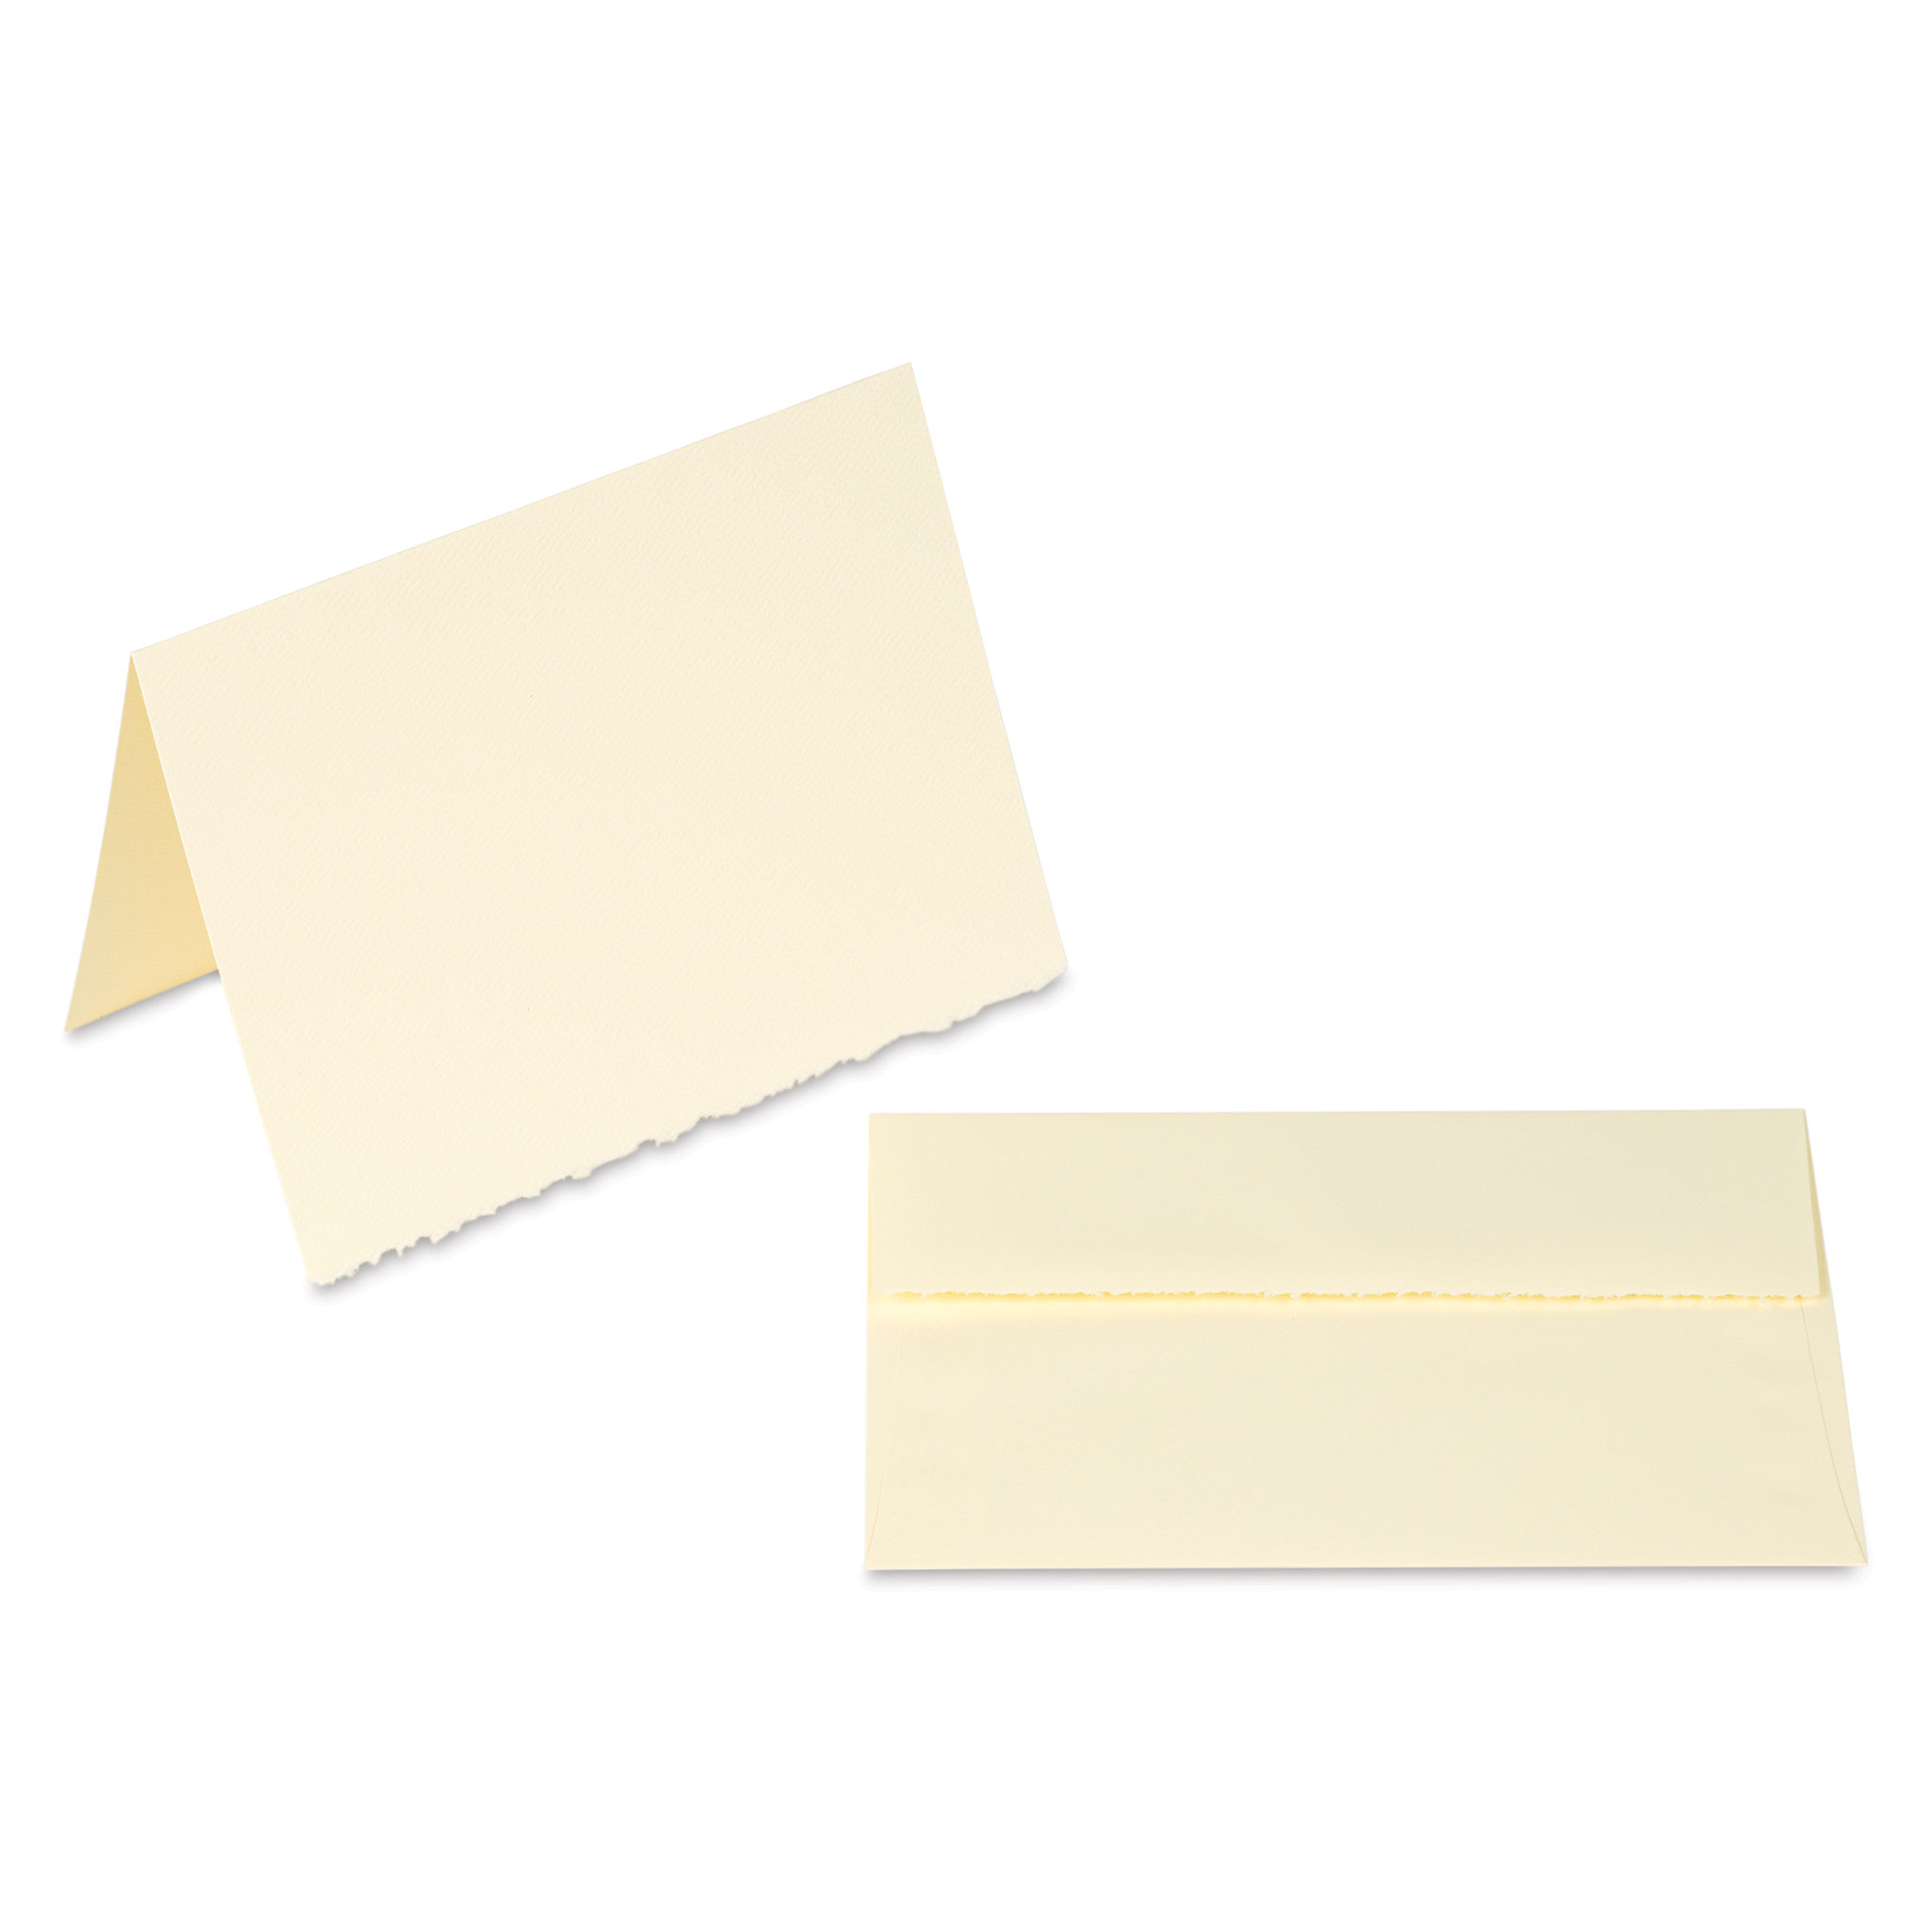 Strathmore Mixed Media Cards, Set of 50 Cards and Envelopes, White, 5” x 7”  - The Art Store/Commercial Art Supply